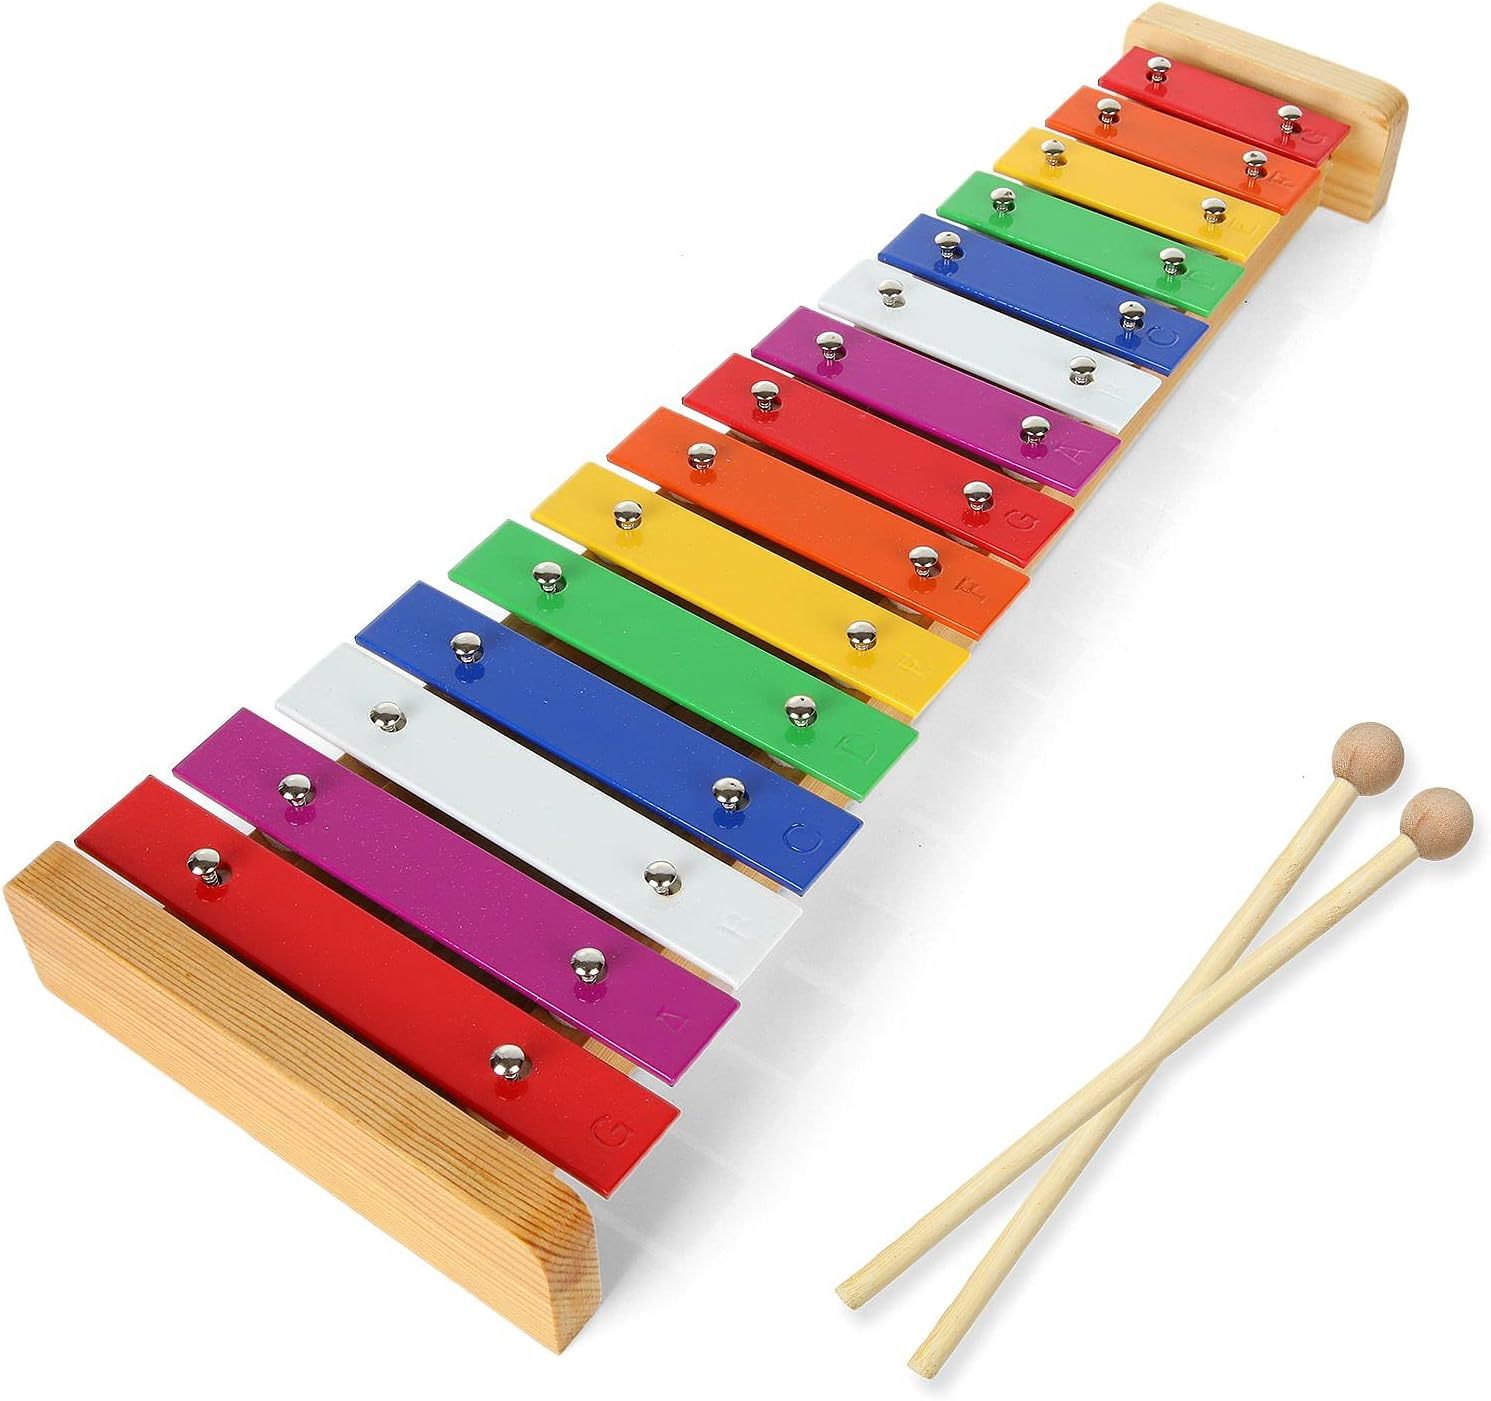 LOONELO Glockenspiel Xylophone with Yellow Case,8 Metal Keys Xylophone with  2 Mallets for Musical Instrument Percussion,Musical Educational Tuned